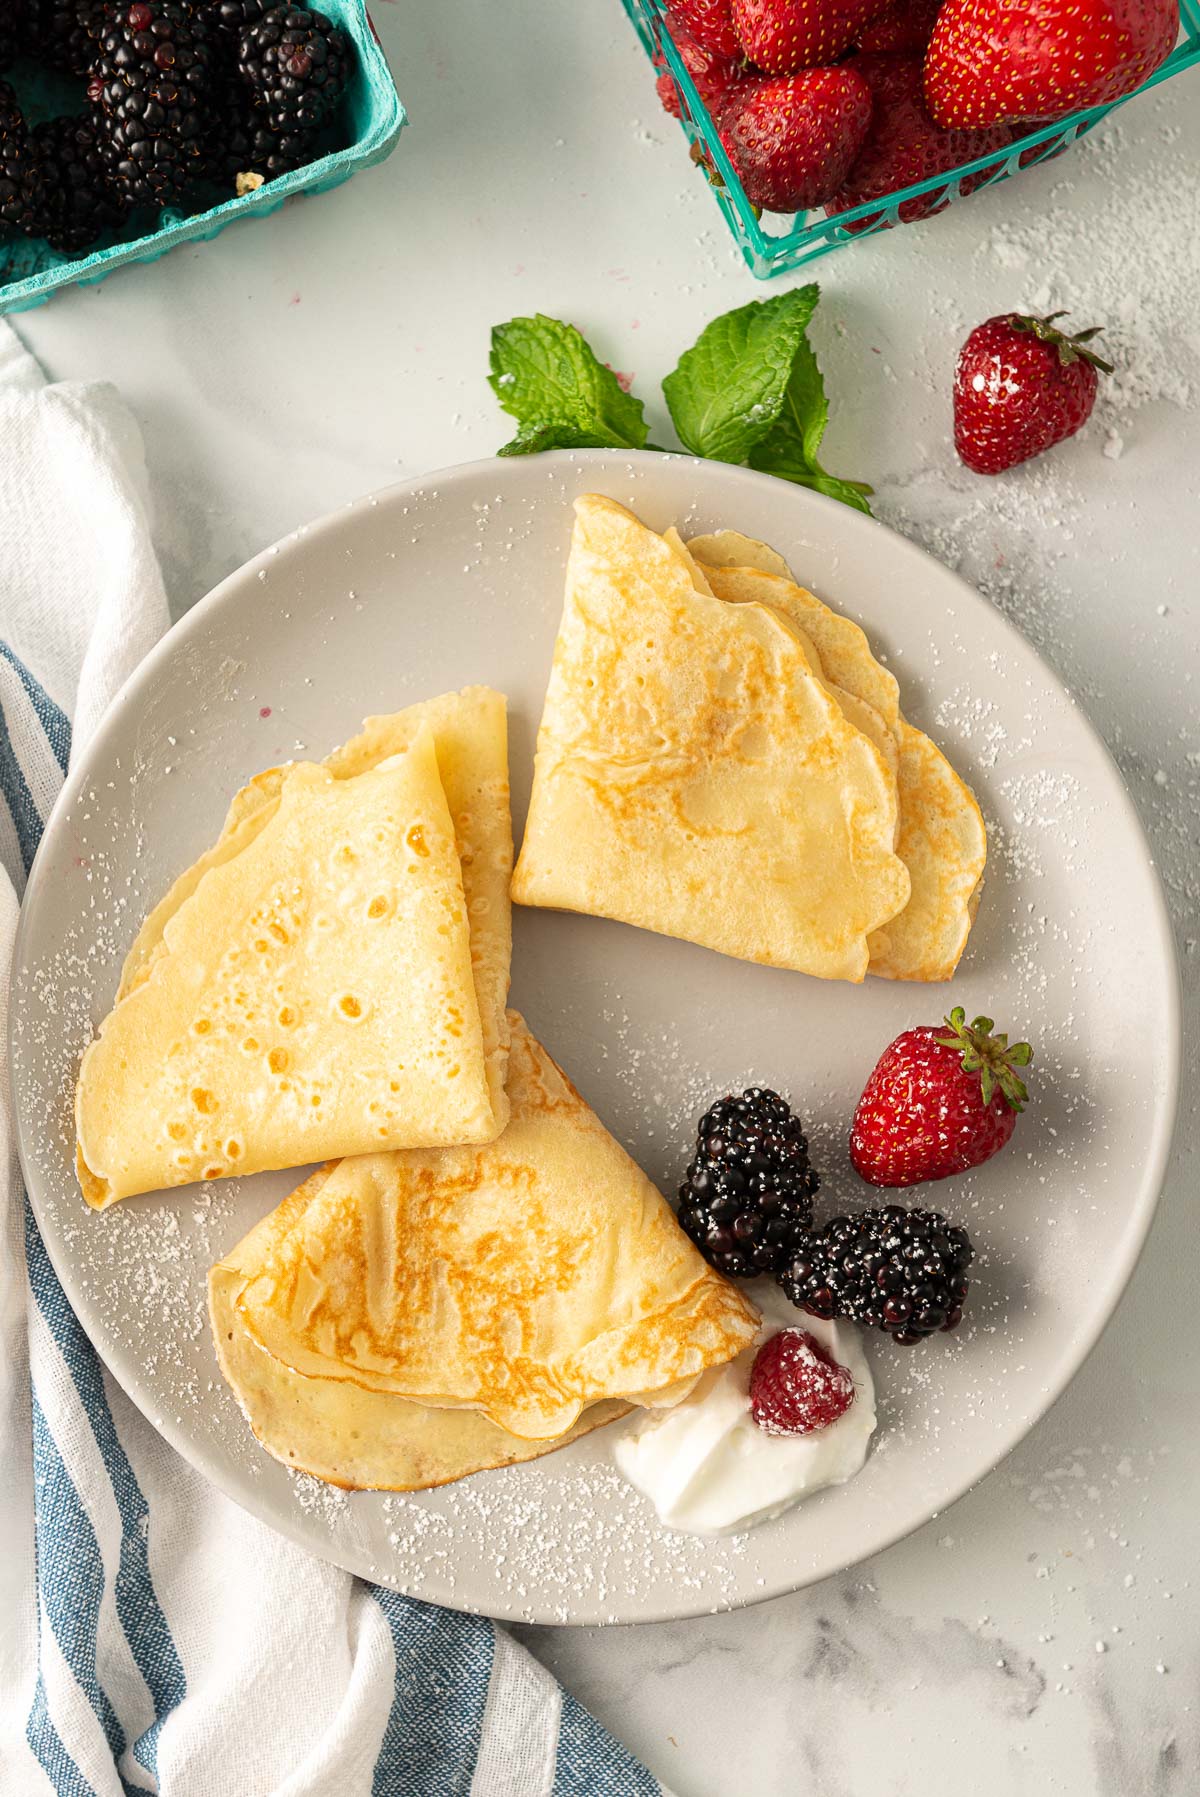 Three crepes folded into triangles with berries and whipped cream on the side.